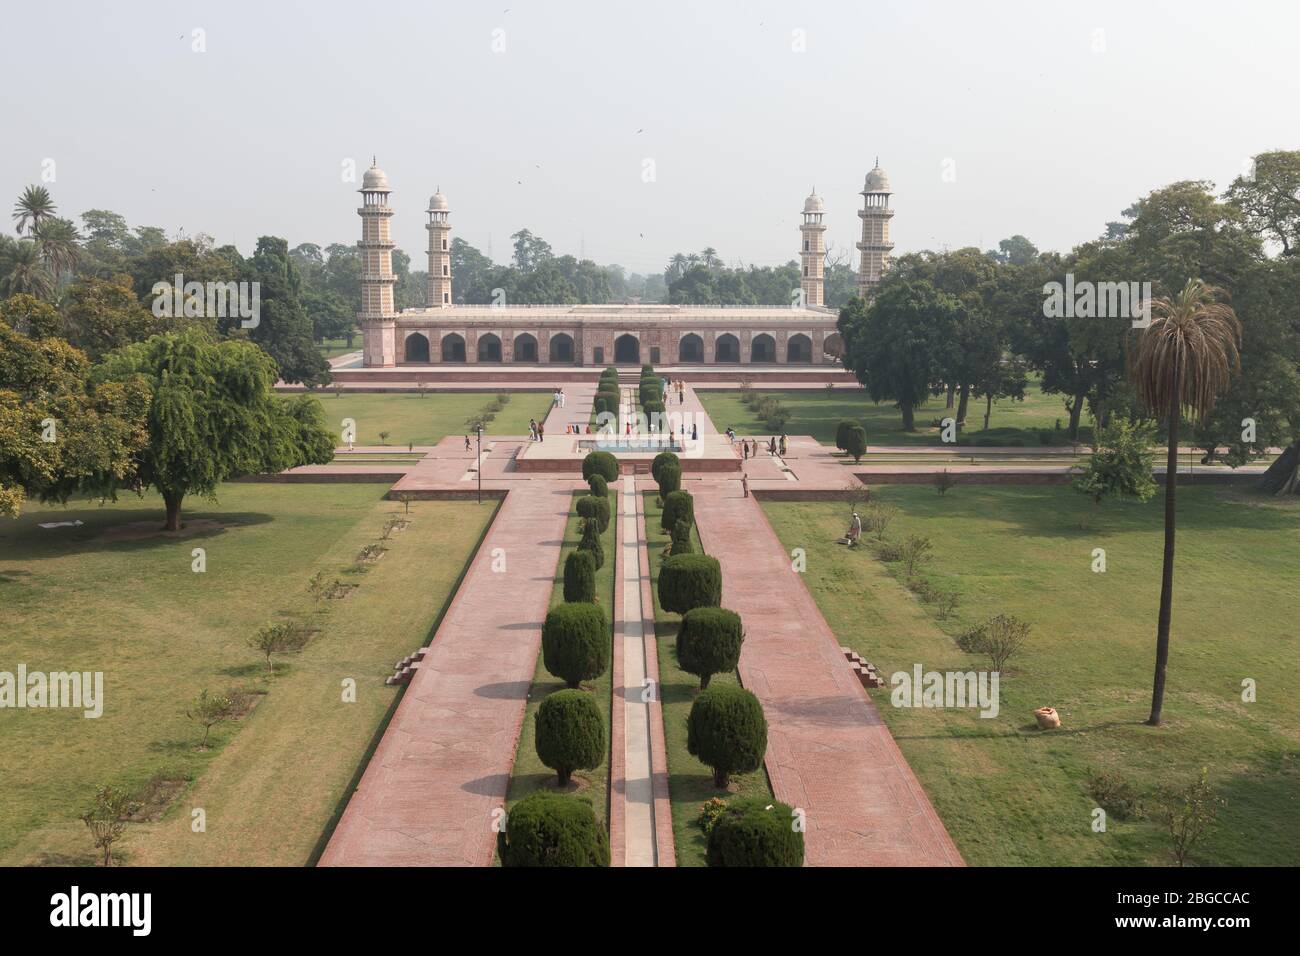 The Tomb of Jahangir in Lahore, Pakistan is a mausoleum dating from 1637, built for the Mughal Emperor Jahangir. Stock Photo